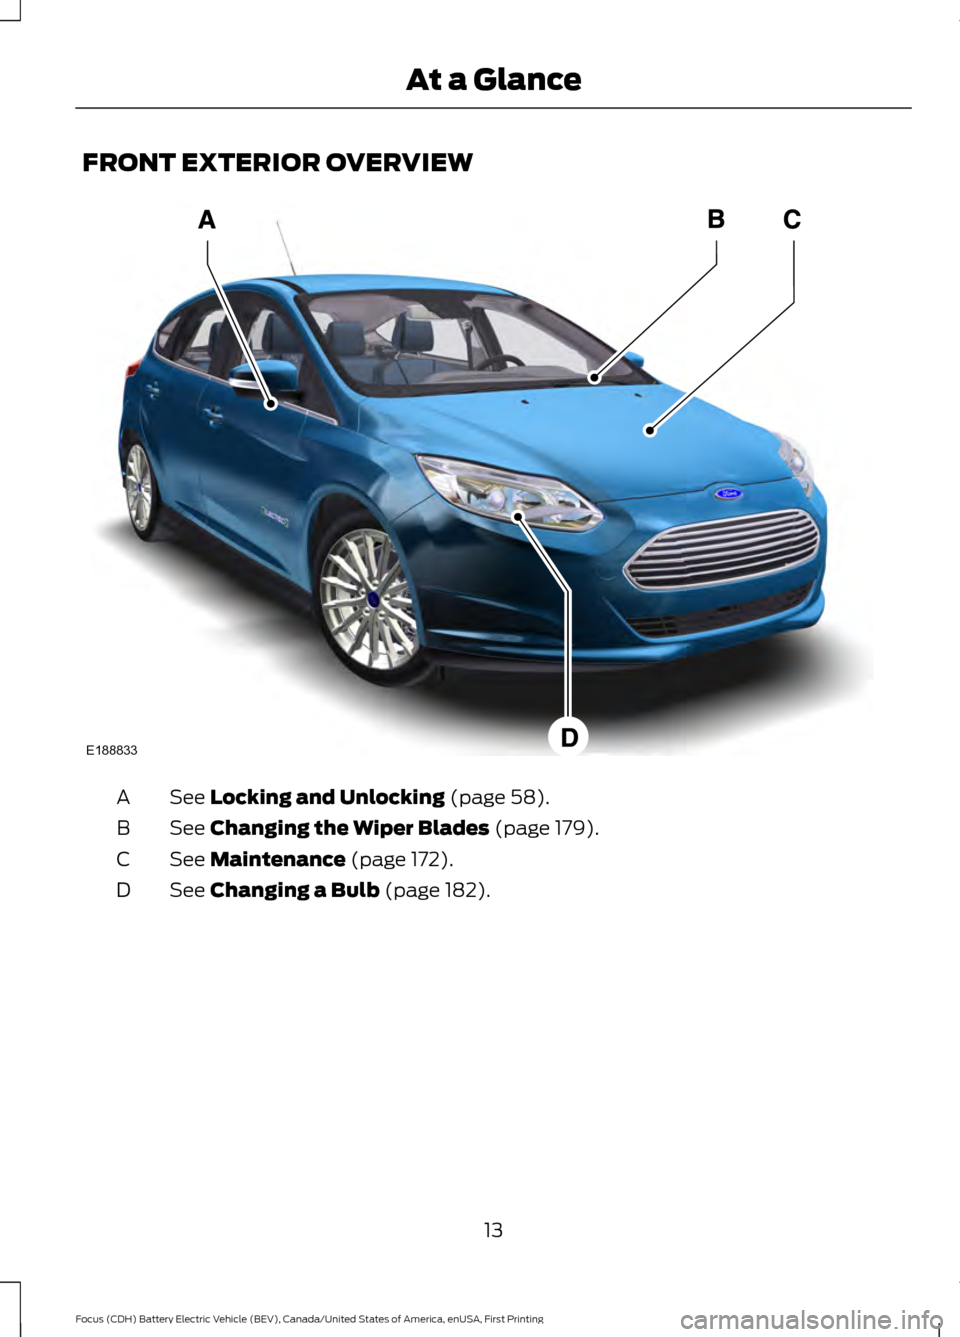 FORD FOCUS ELECTRIC 2016 3.G User Guide FRONT EXTERIOR OVERVIEW
See Locking and Unlocking (page 58).
A
See 
Changing the Wiper Blades (page 179).
B
See 
Maintenance (page 172).
C
See 
Changing a Bulb (page 182).
D
13
Focus (CDH) Battery Ele